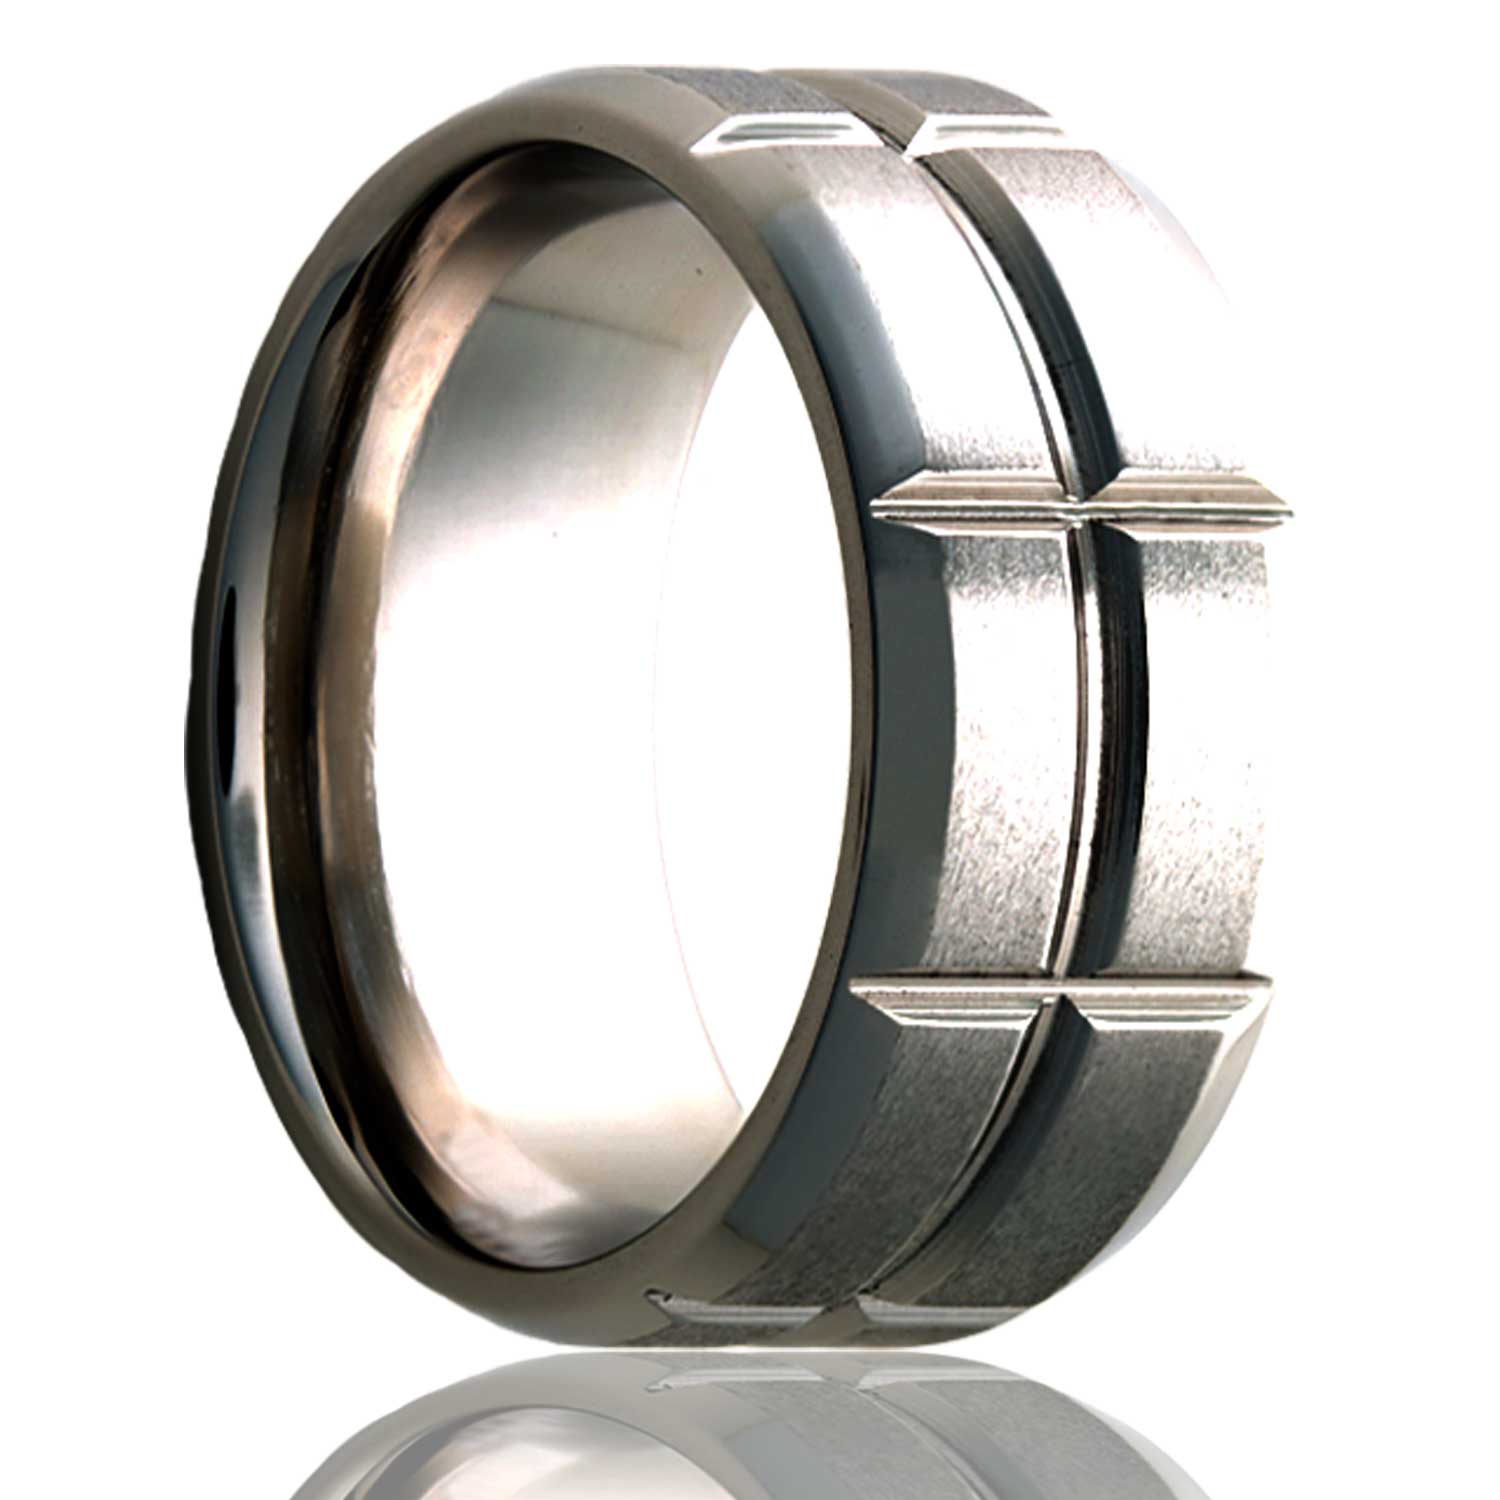 A satin finish titanium wedding band with beveled edges with intersecting grooves displayed on a neutral white background.